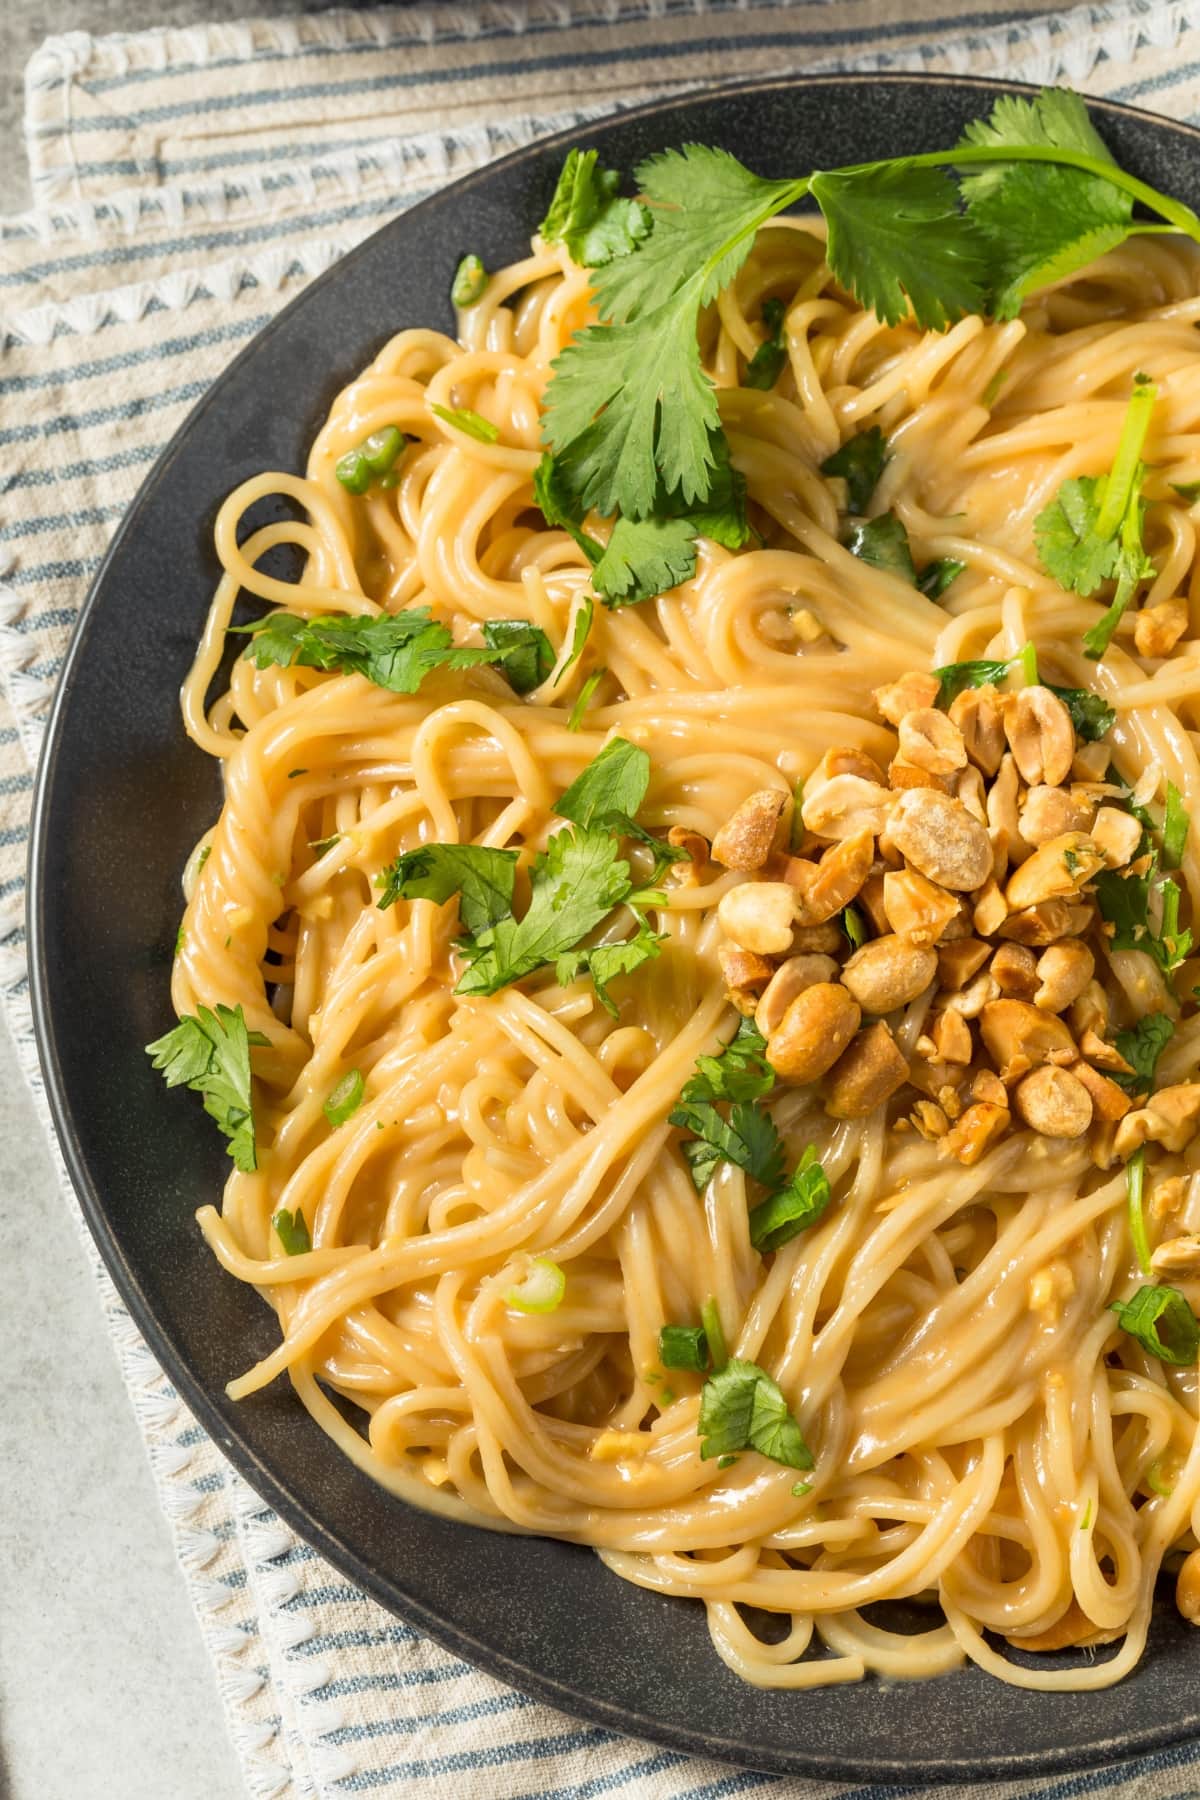 Pasta noodles with creamy peanut sauce and cilantro and peanut garnish served on a black plate.